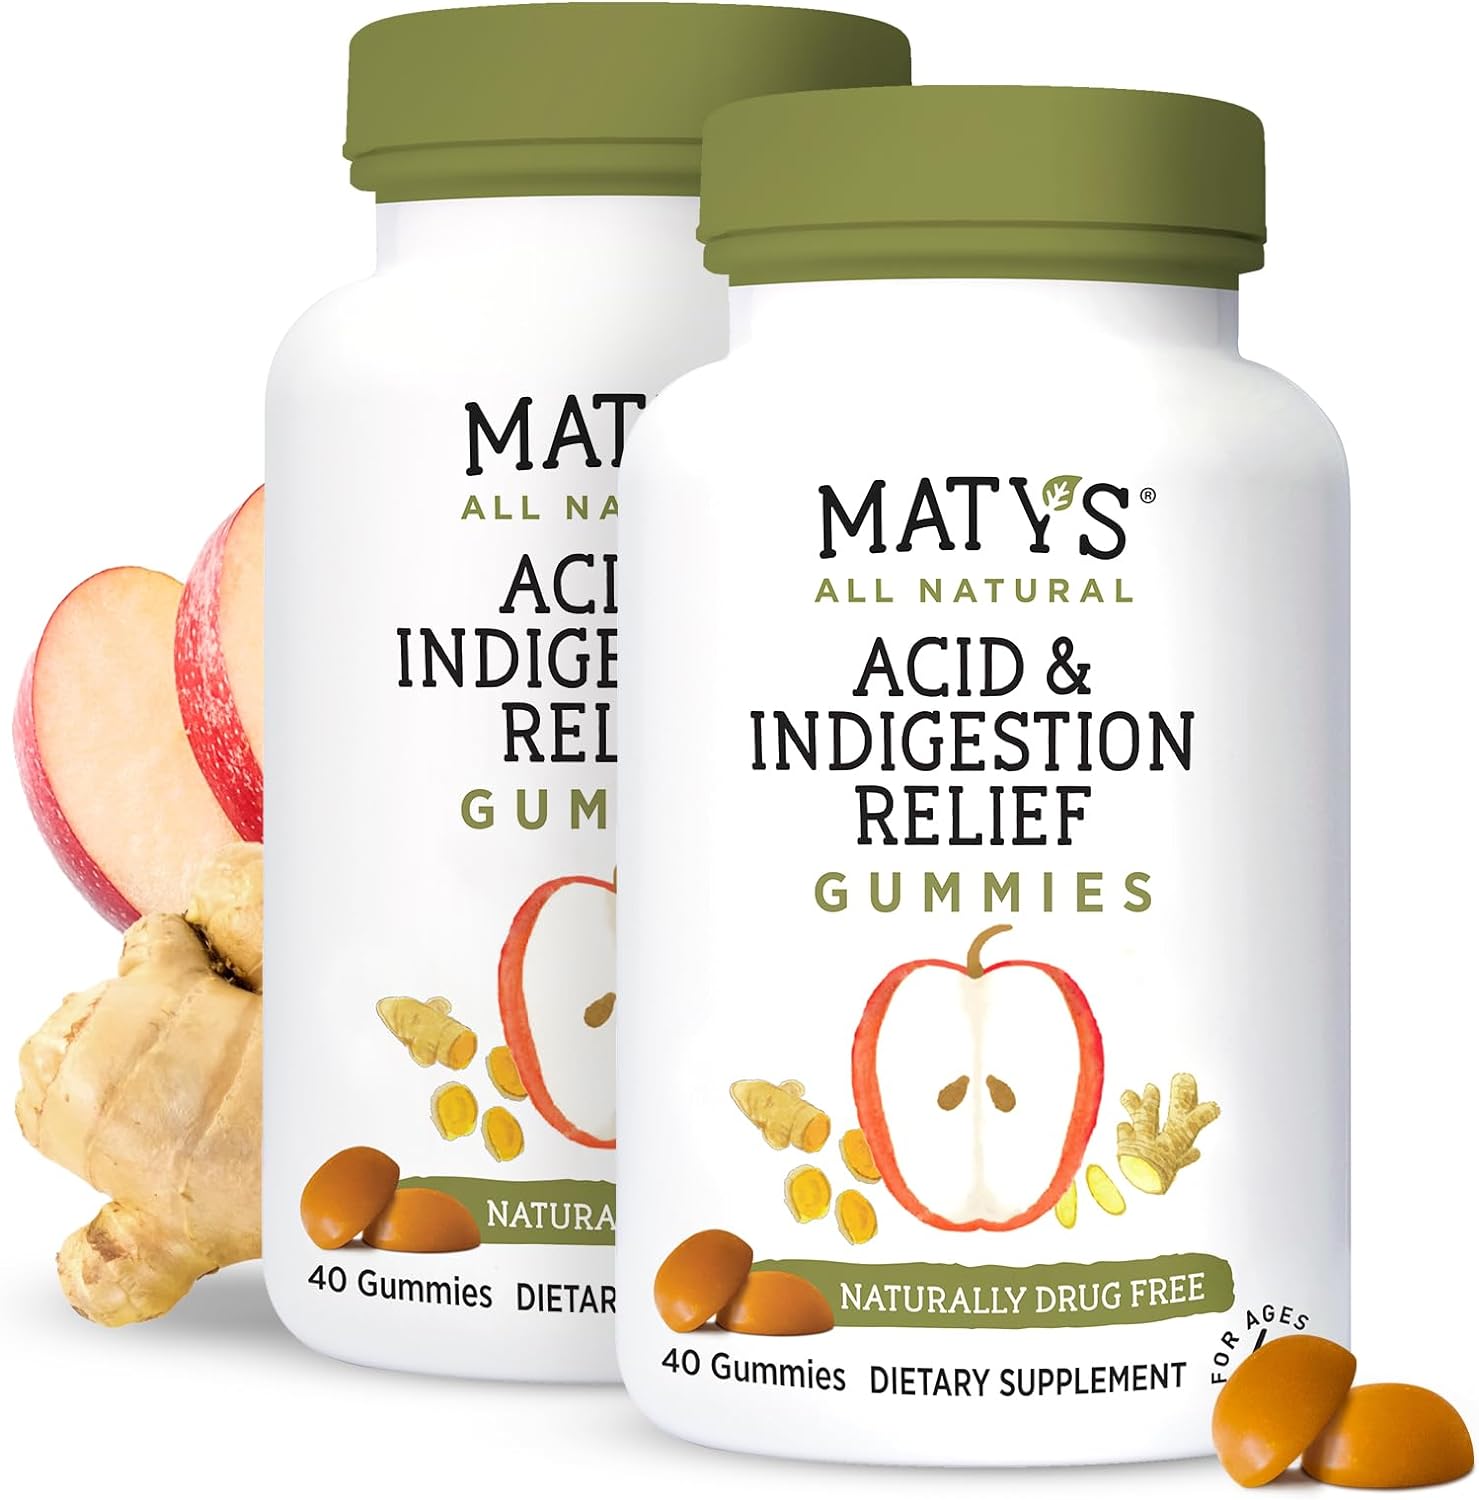 Matys Acid & Indigestion Relief Gummies, Safe Antacid for Occasional Acid Reflux & Heartburn in Adults & Kids 4 Yrs Old +, Low Sugar, Gluten Free, Vegan Made with Apple Cider Vinegar, 2 Pack, 80 count